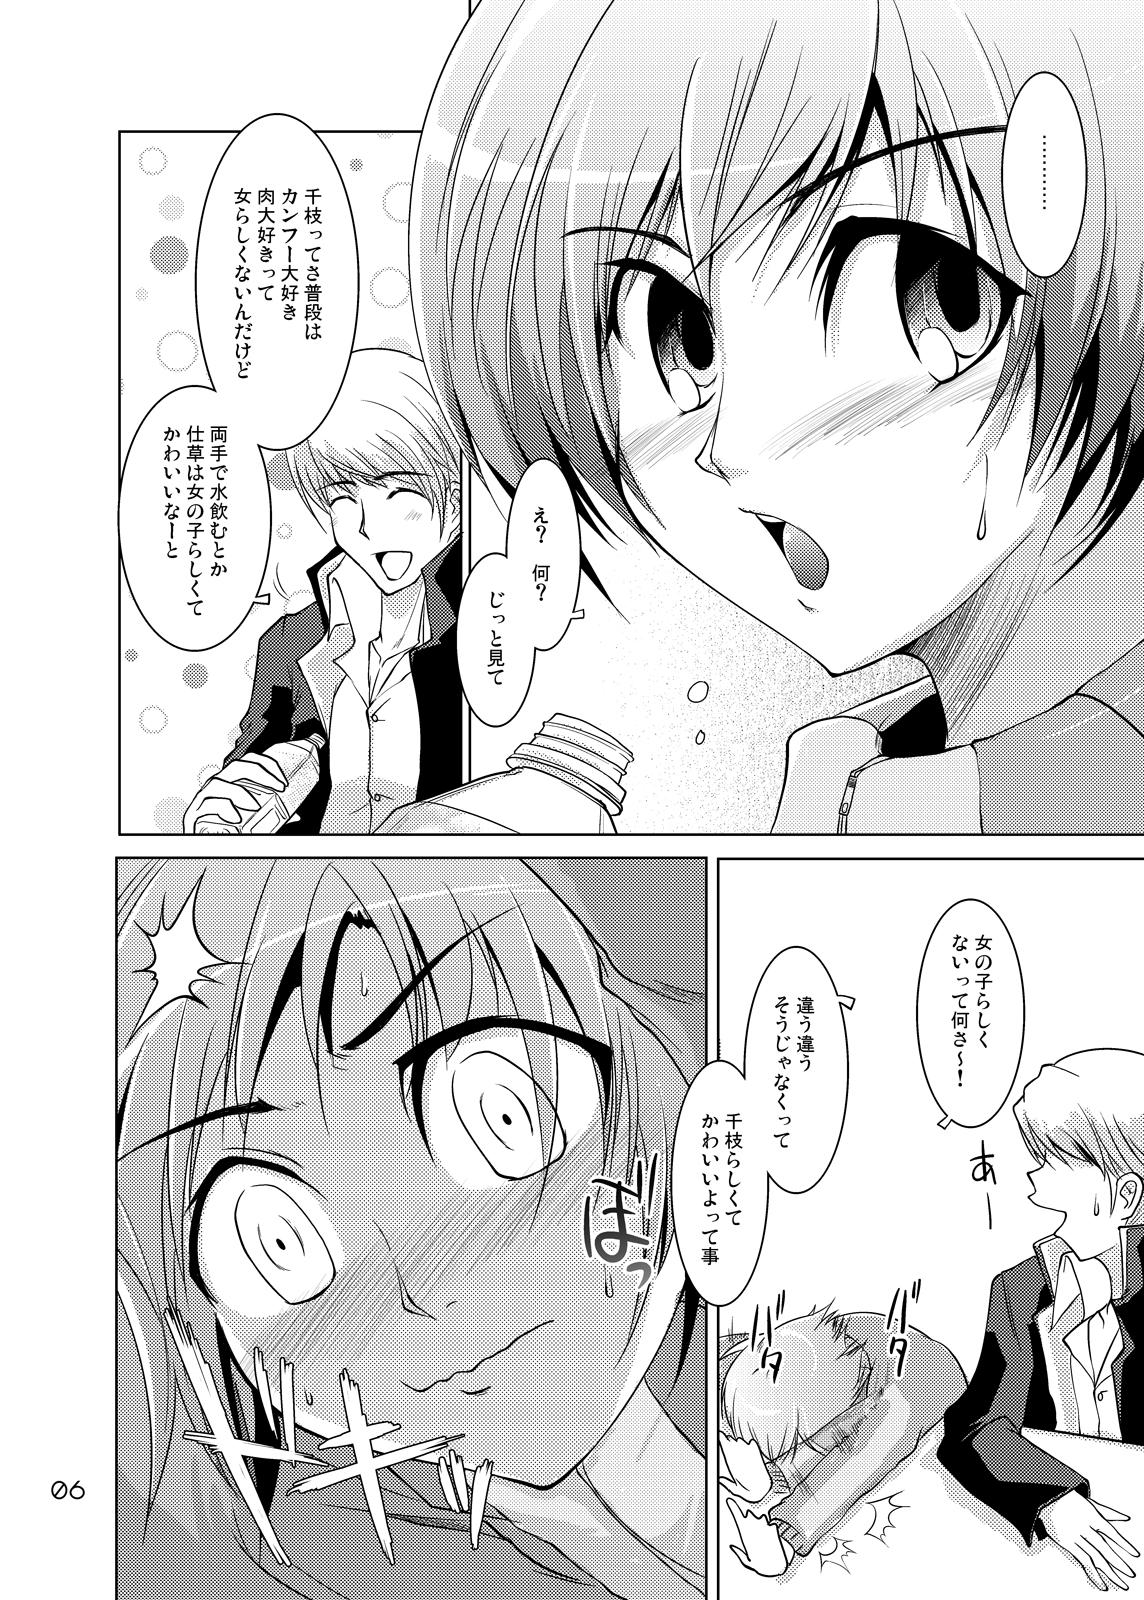 Sislovesme S4 spats forever - Persona 4 Pay - Page 5